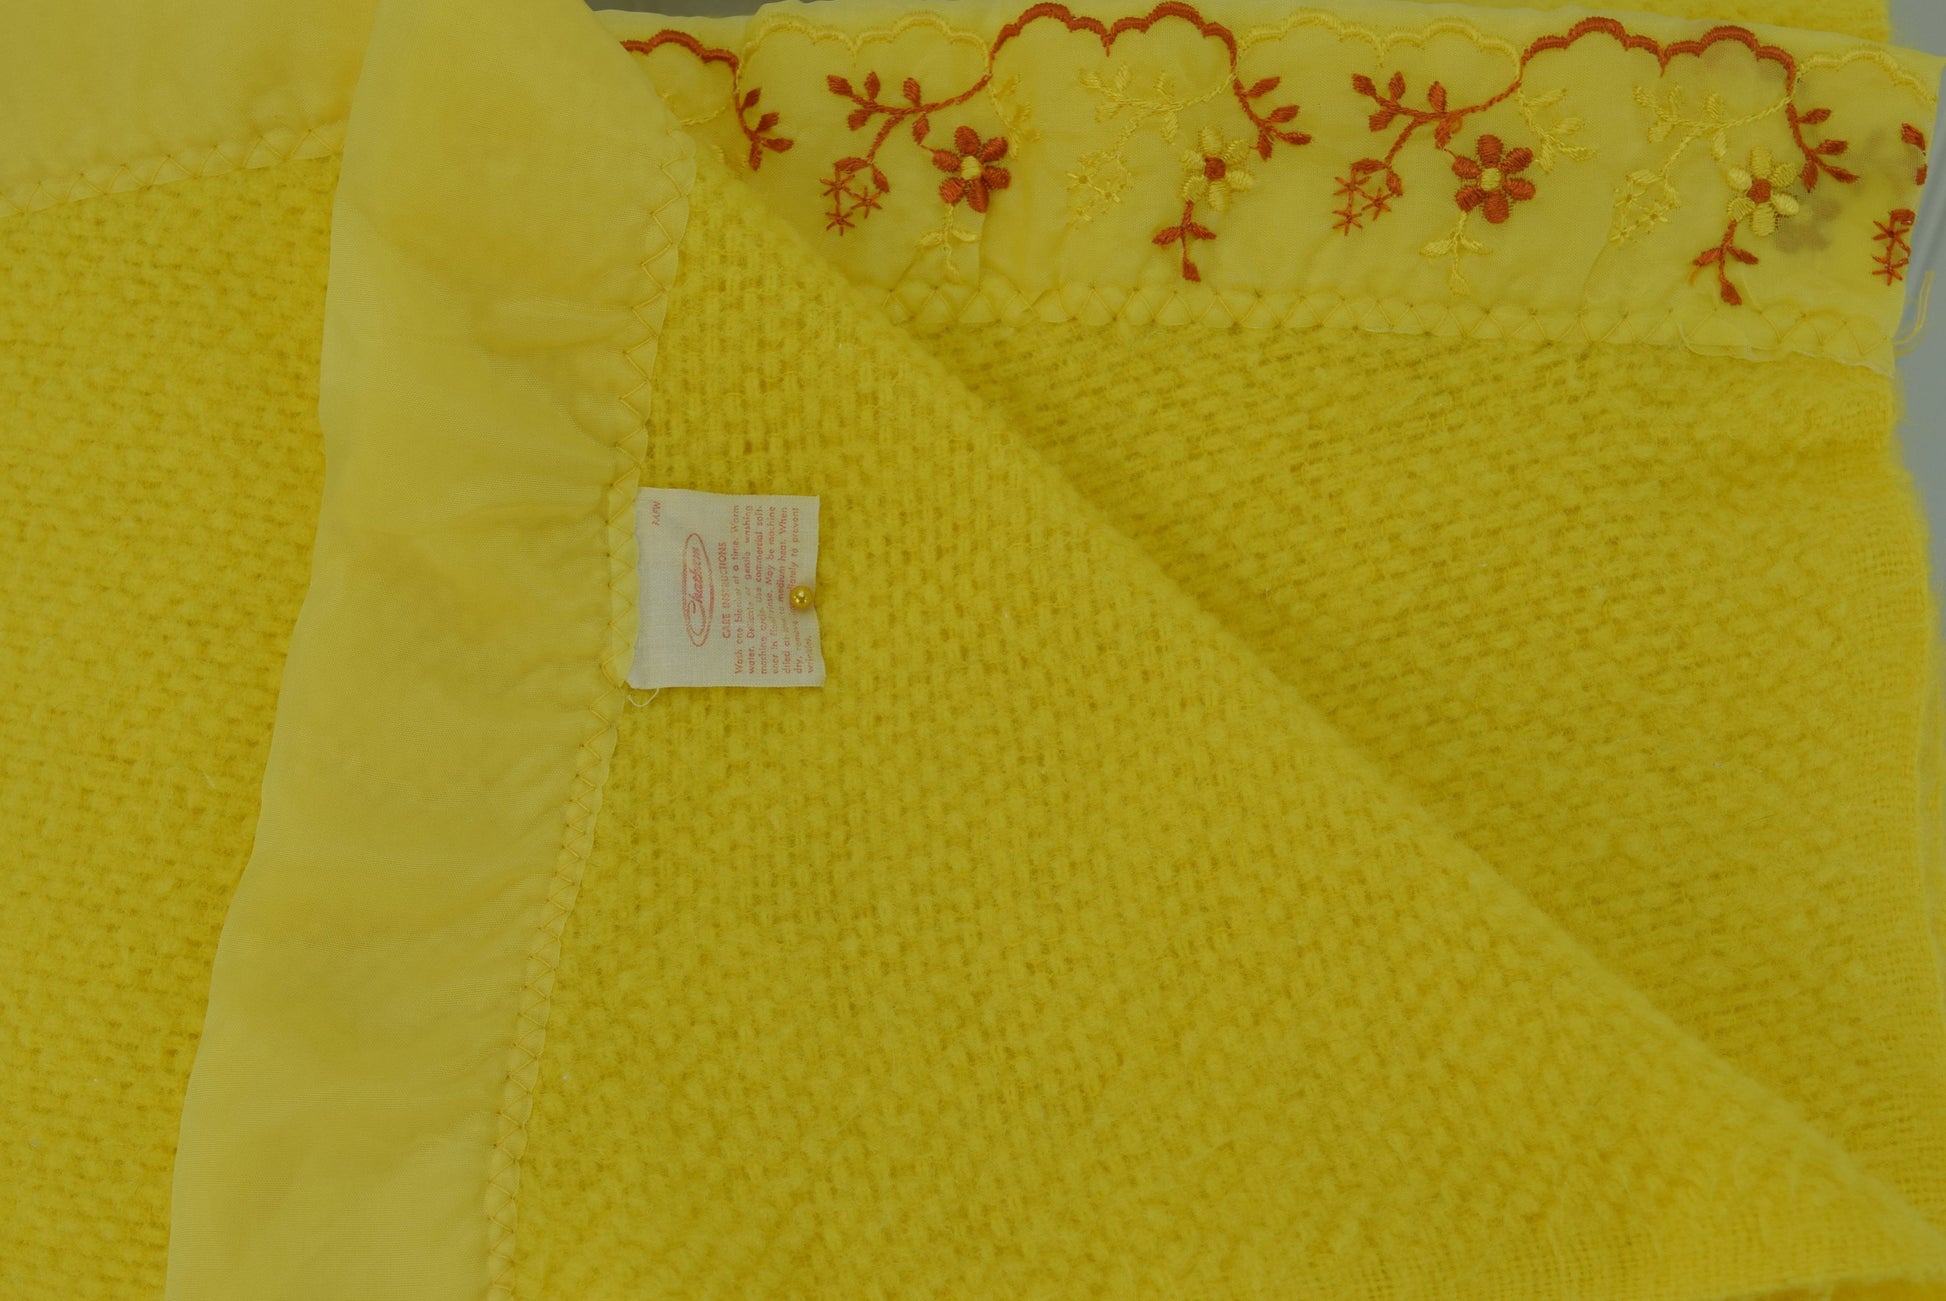 Acrylic Thermal Blanket for sale Lemon Yellow with Embroidered Binding Retro Bedding 86"